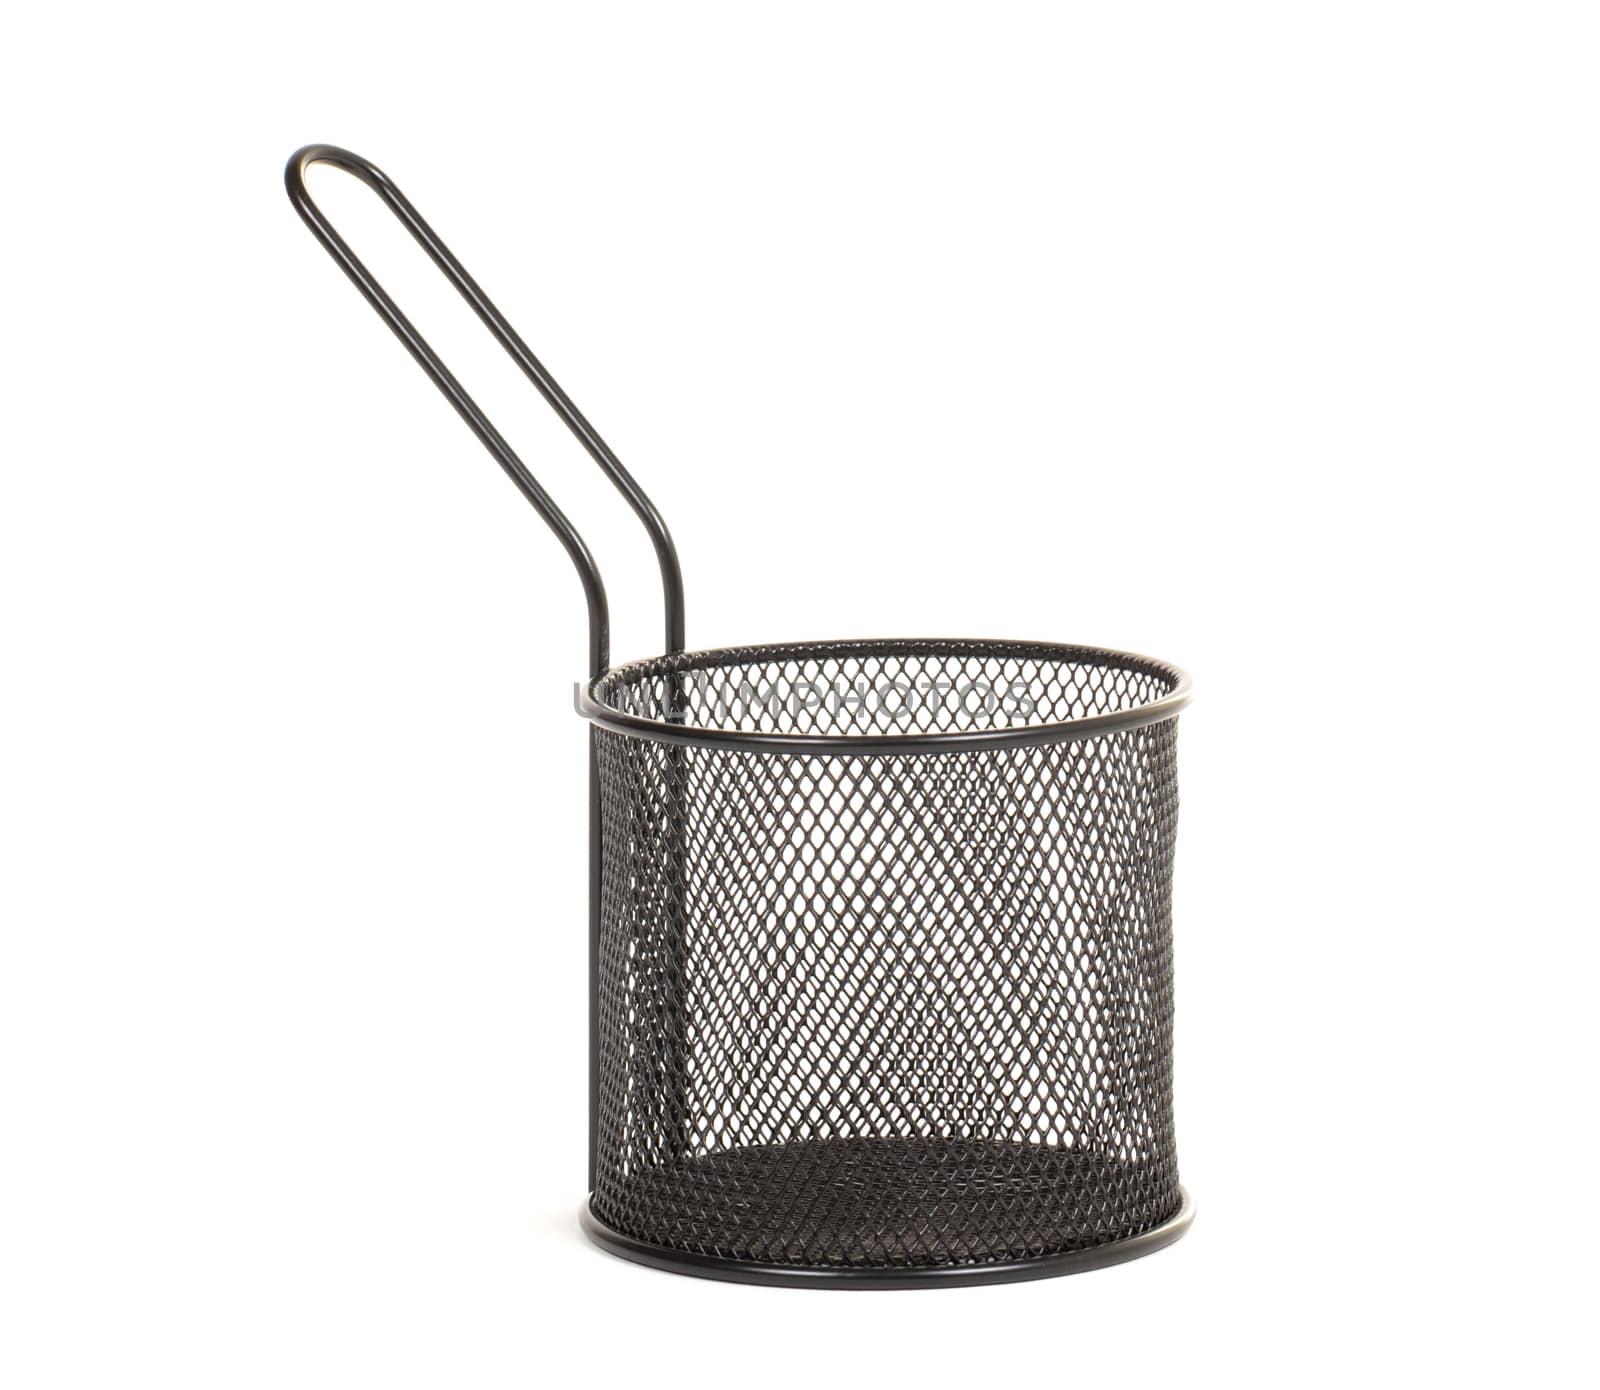 Small wire frying basket by michaklootwijk